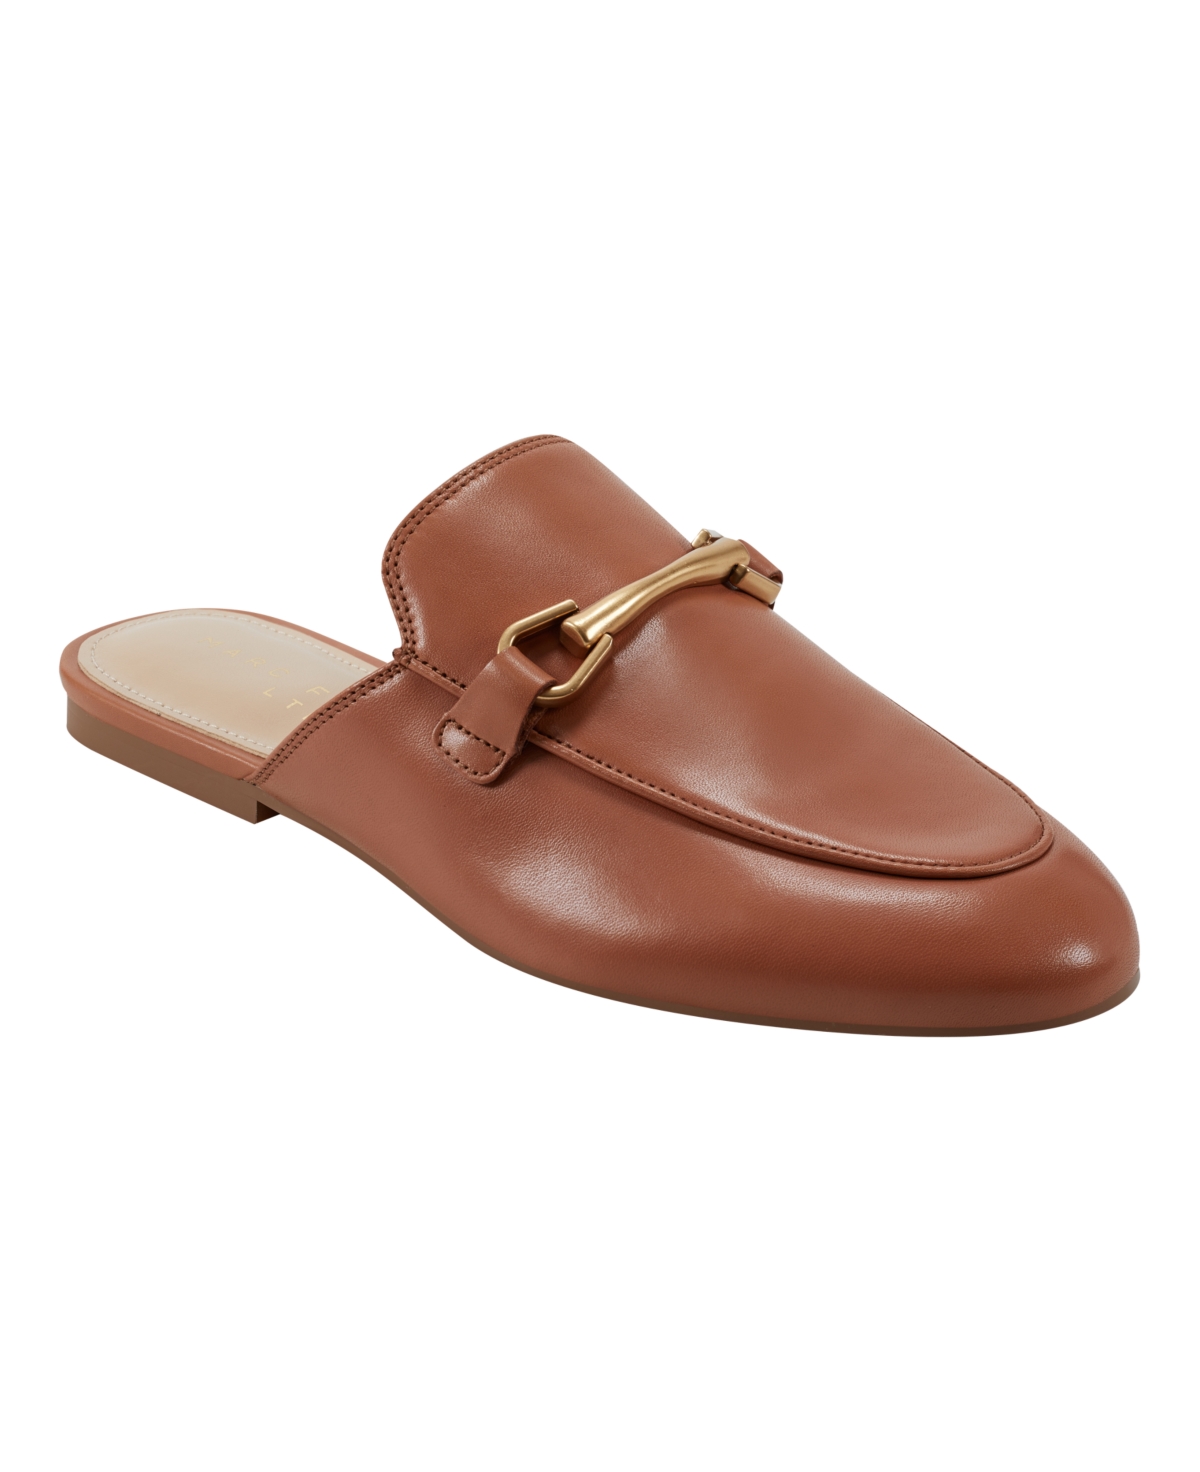 Women's Butler Slip-On Almond Toe Casual Loafers - Medium Natural Leather